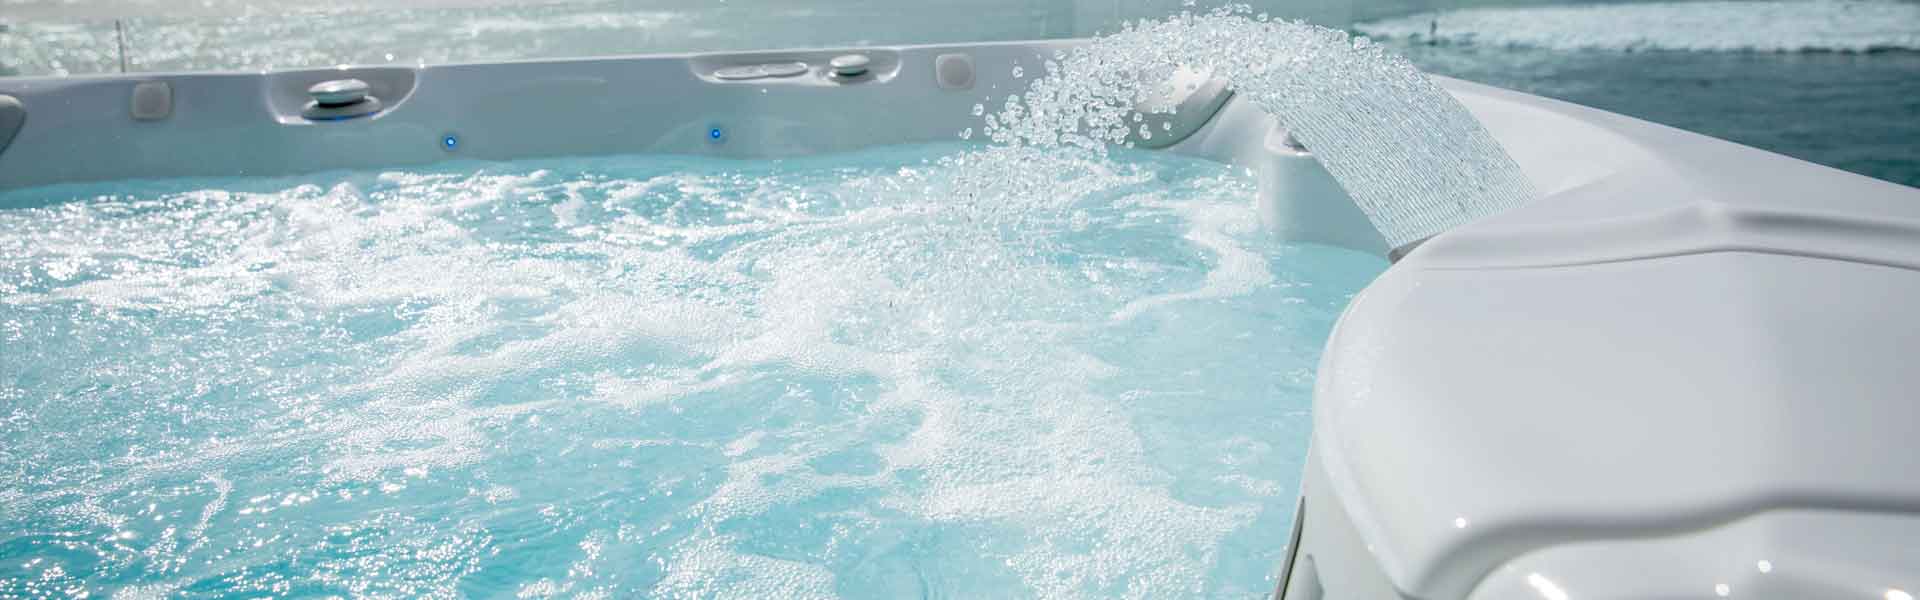 The Top 5 Benefits of Hot Water Immersion